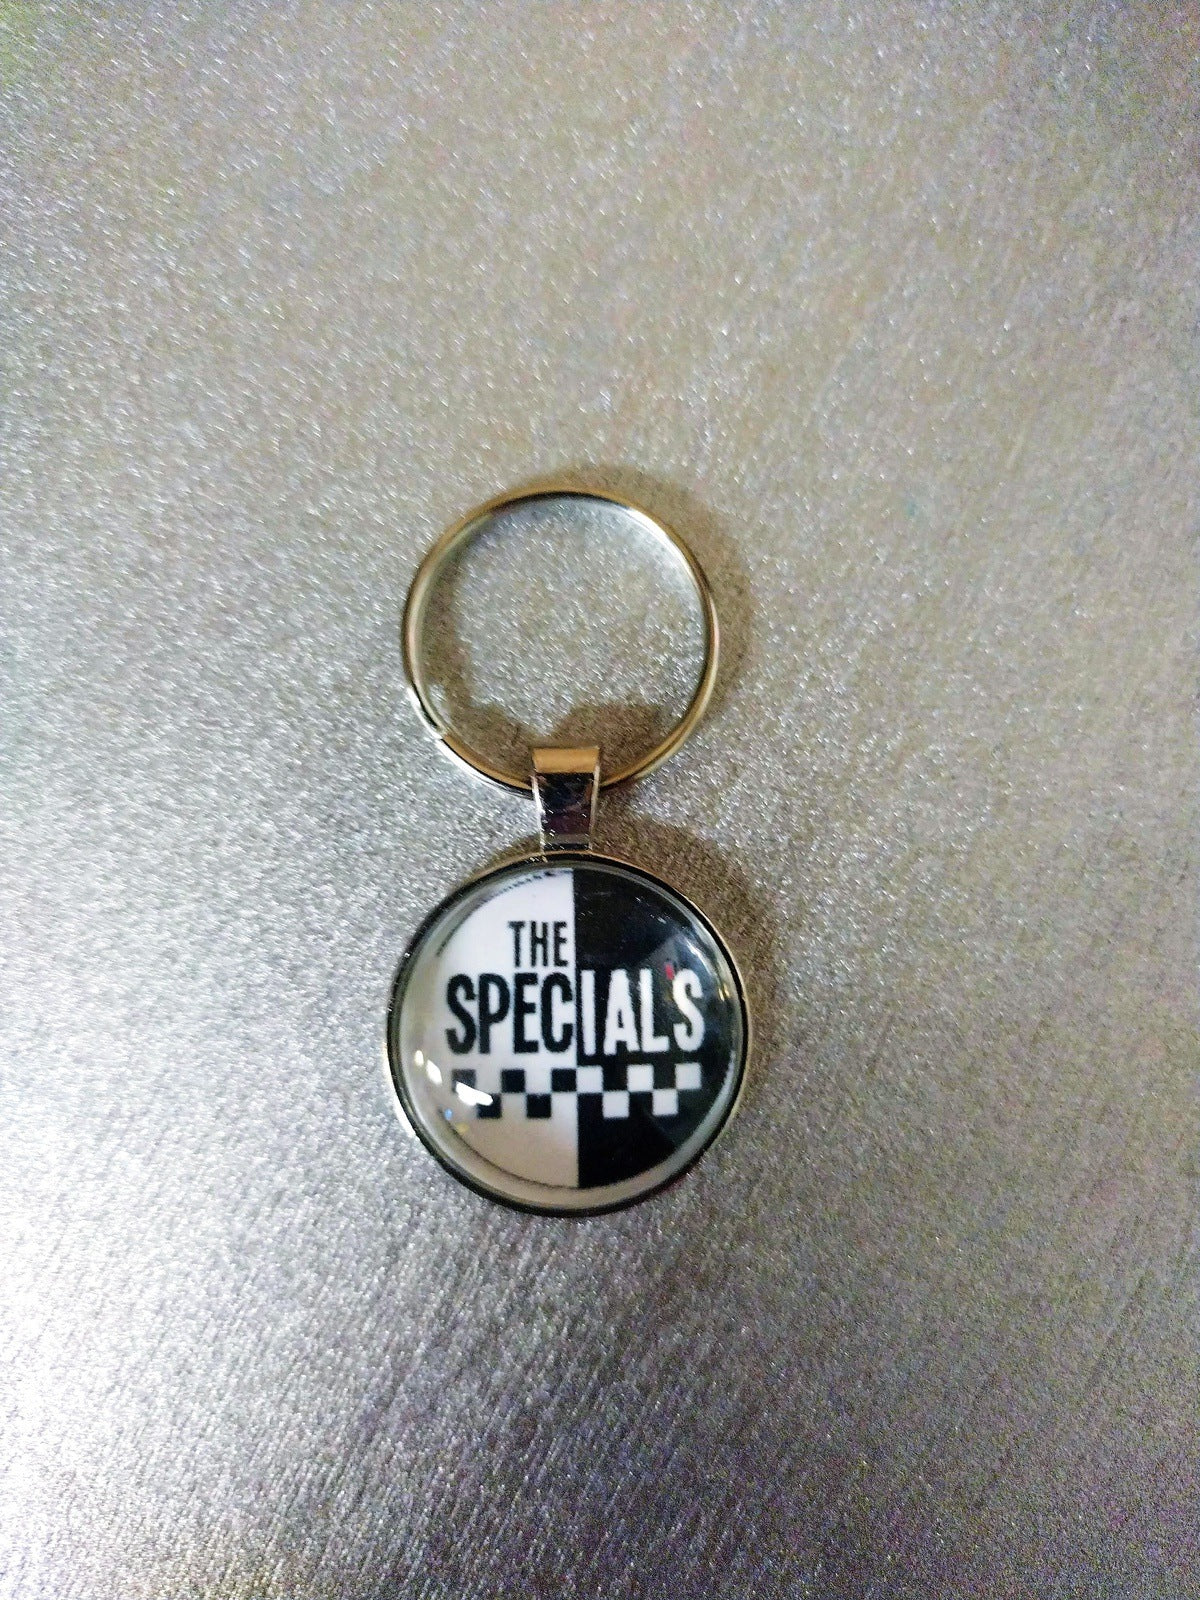 The Specials 1 Inch Keychain